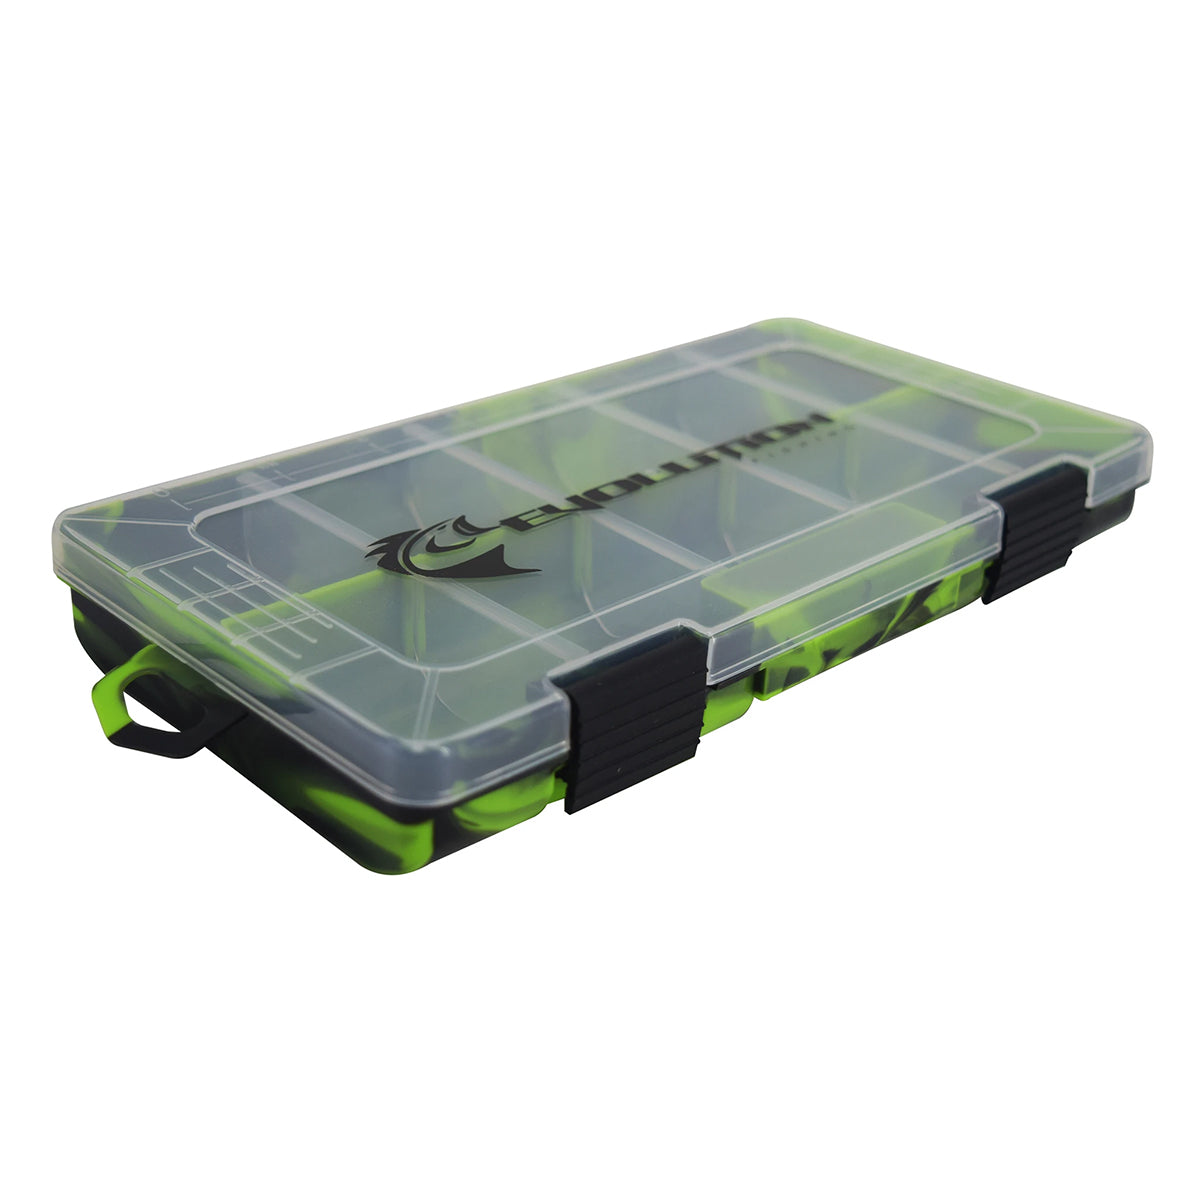 Shop Online Fishing Accessories in Arizona, Fishing Tools and Accessories, Fishing Accessories Tackle Tray